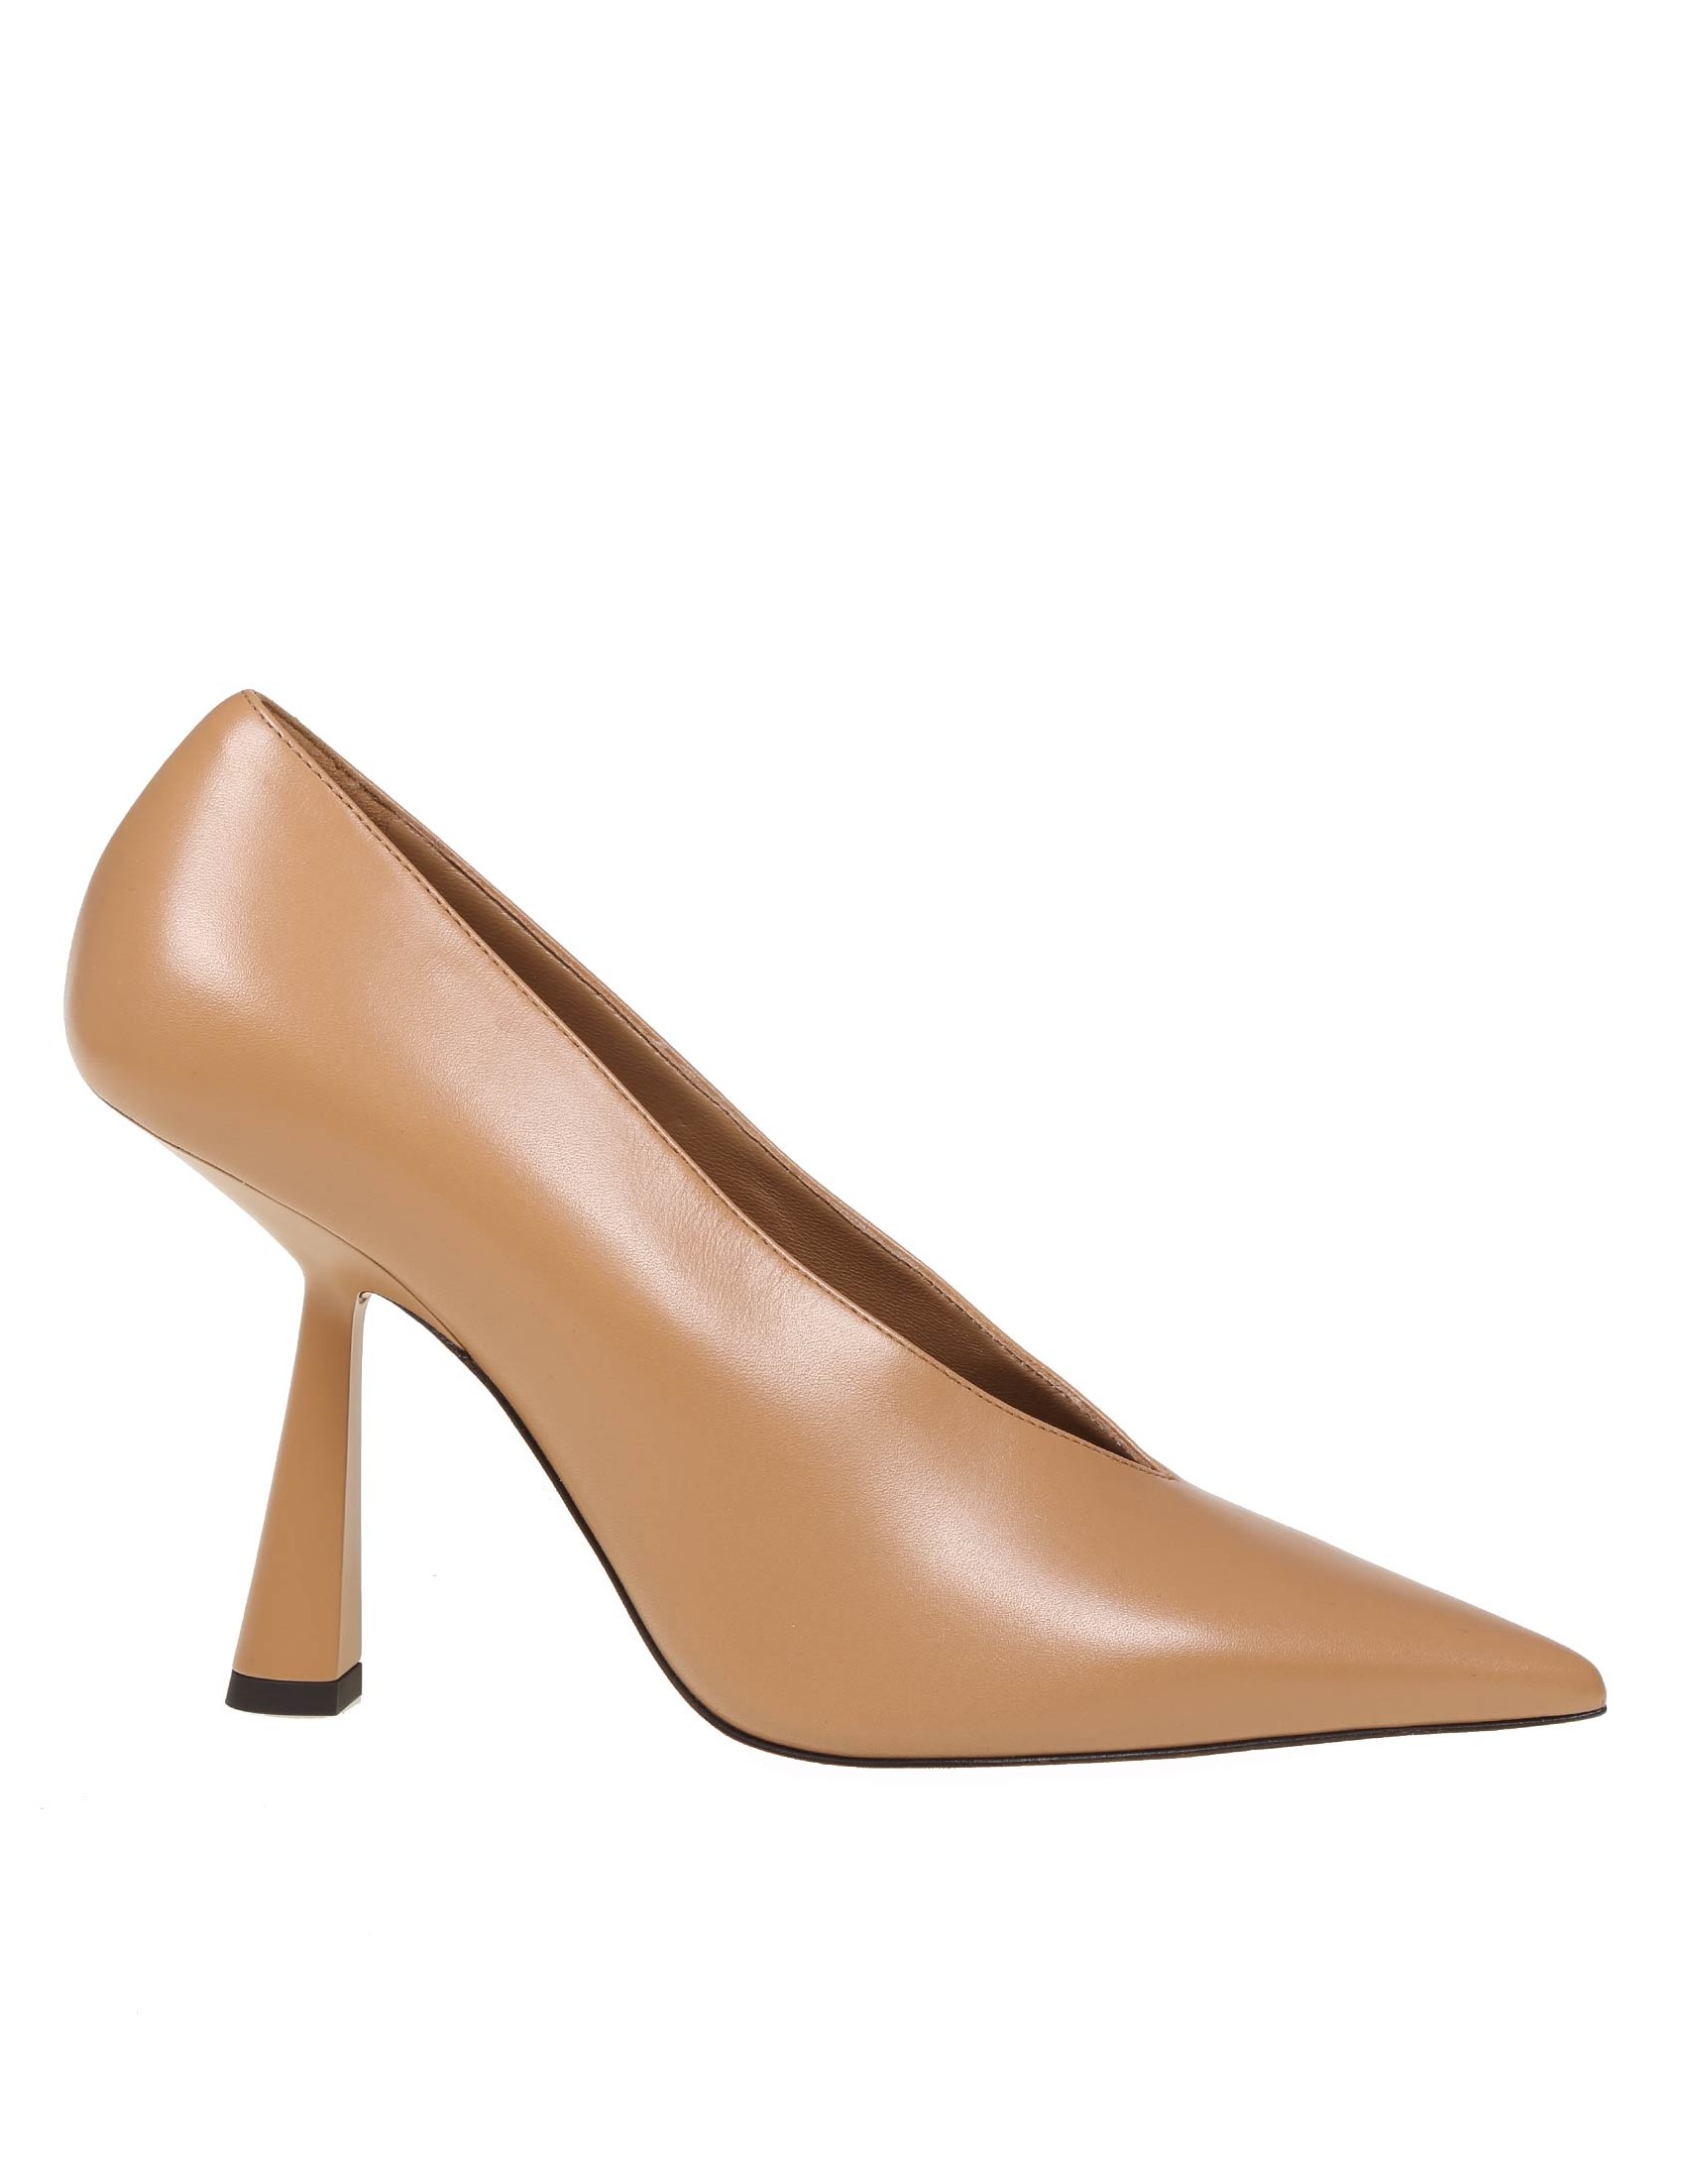 JIMMY CHOO PUMP IN COOKIE COLOR LEATHER